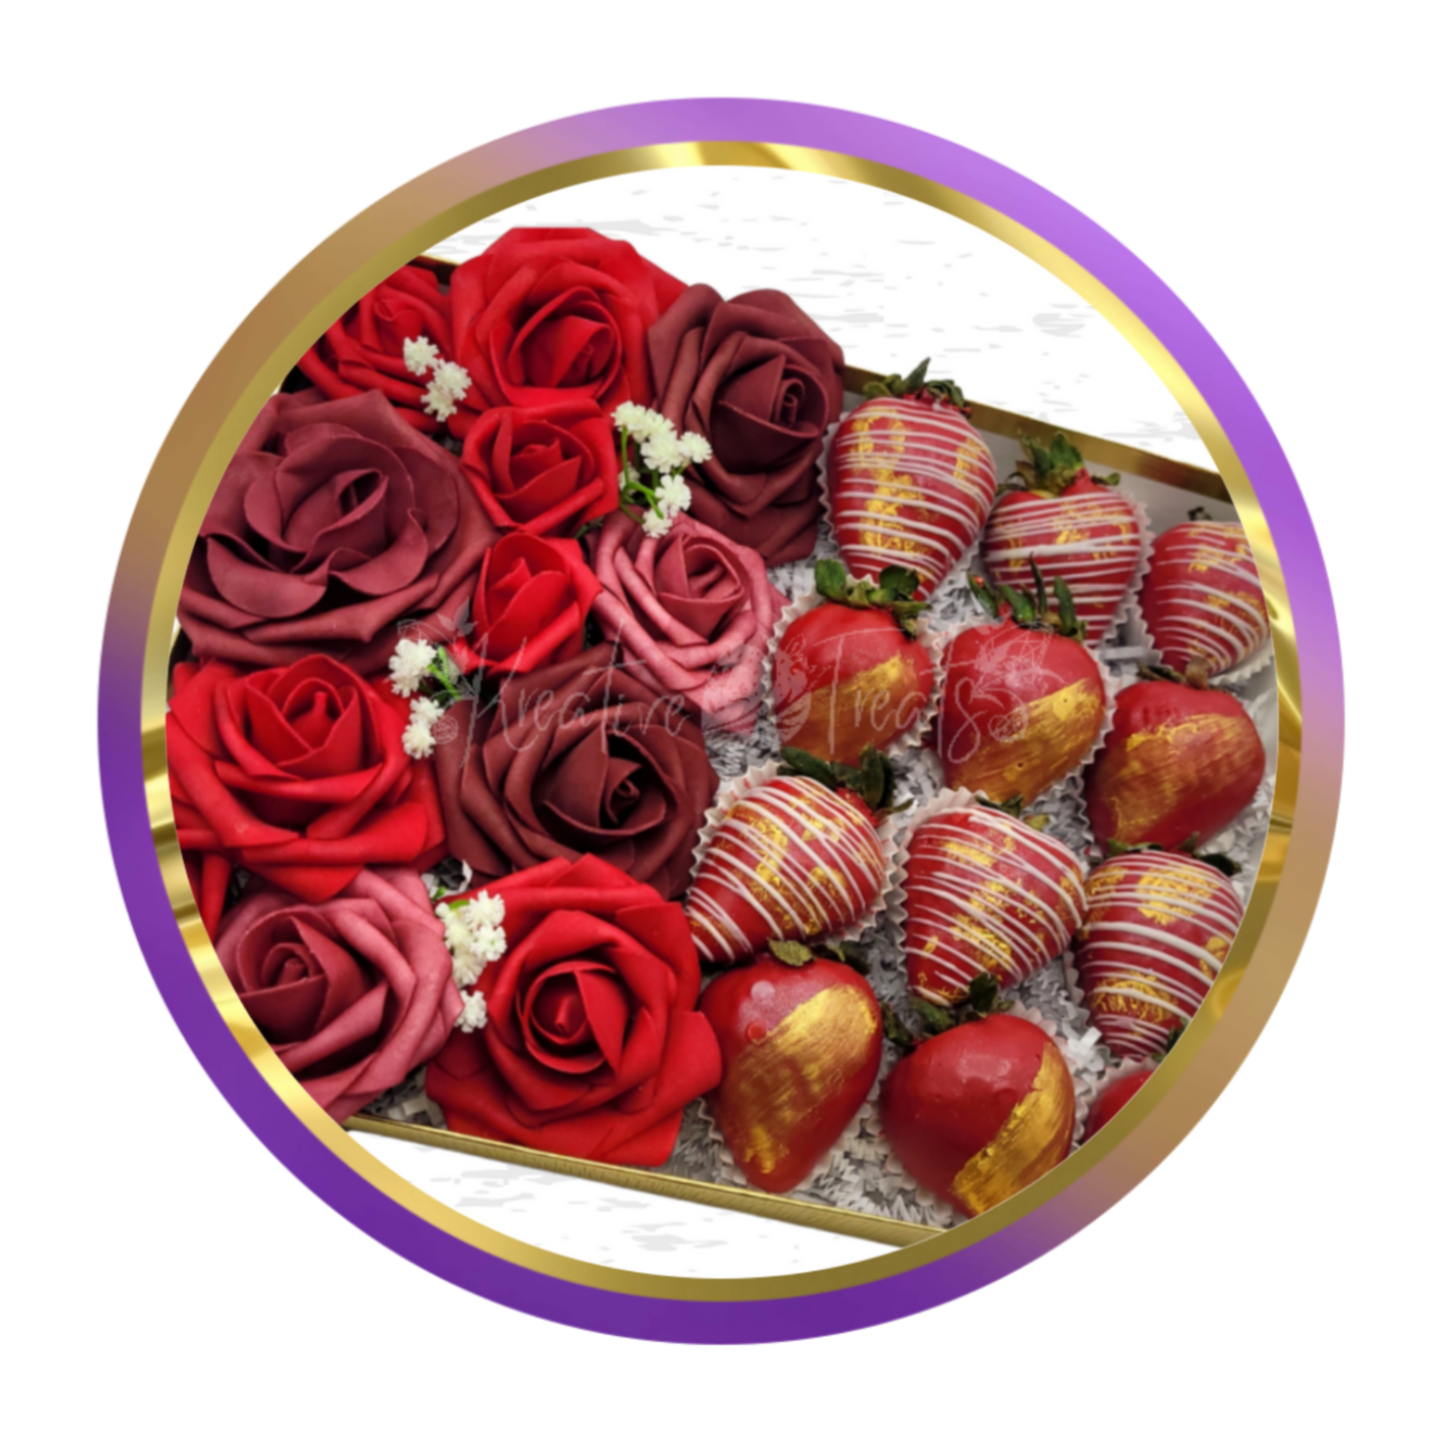 Dazzle Berries and Rose Gift Box